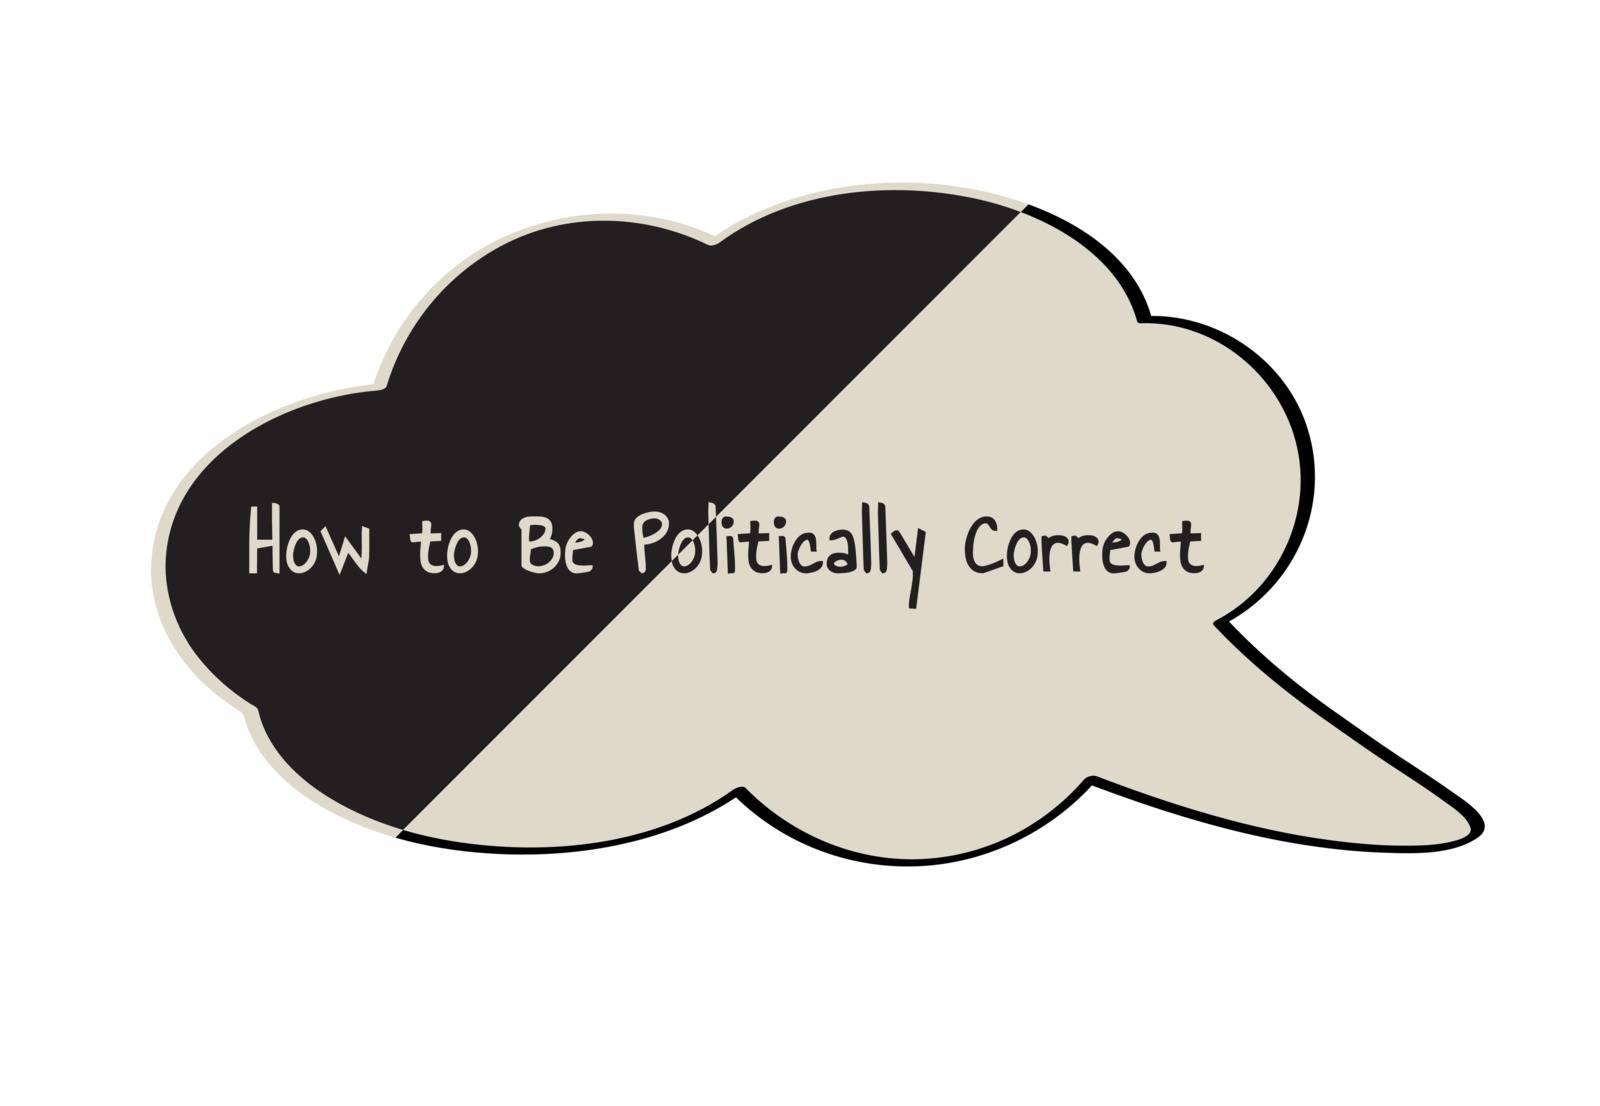 Divided speak bubble with text How to Be Politically Correct